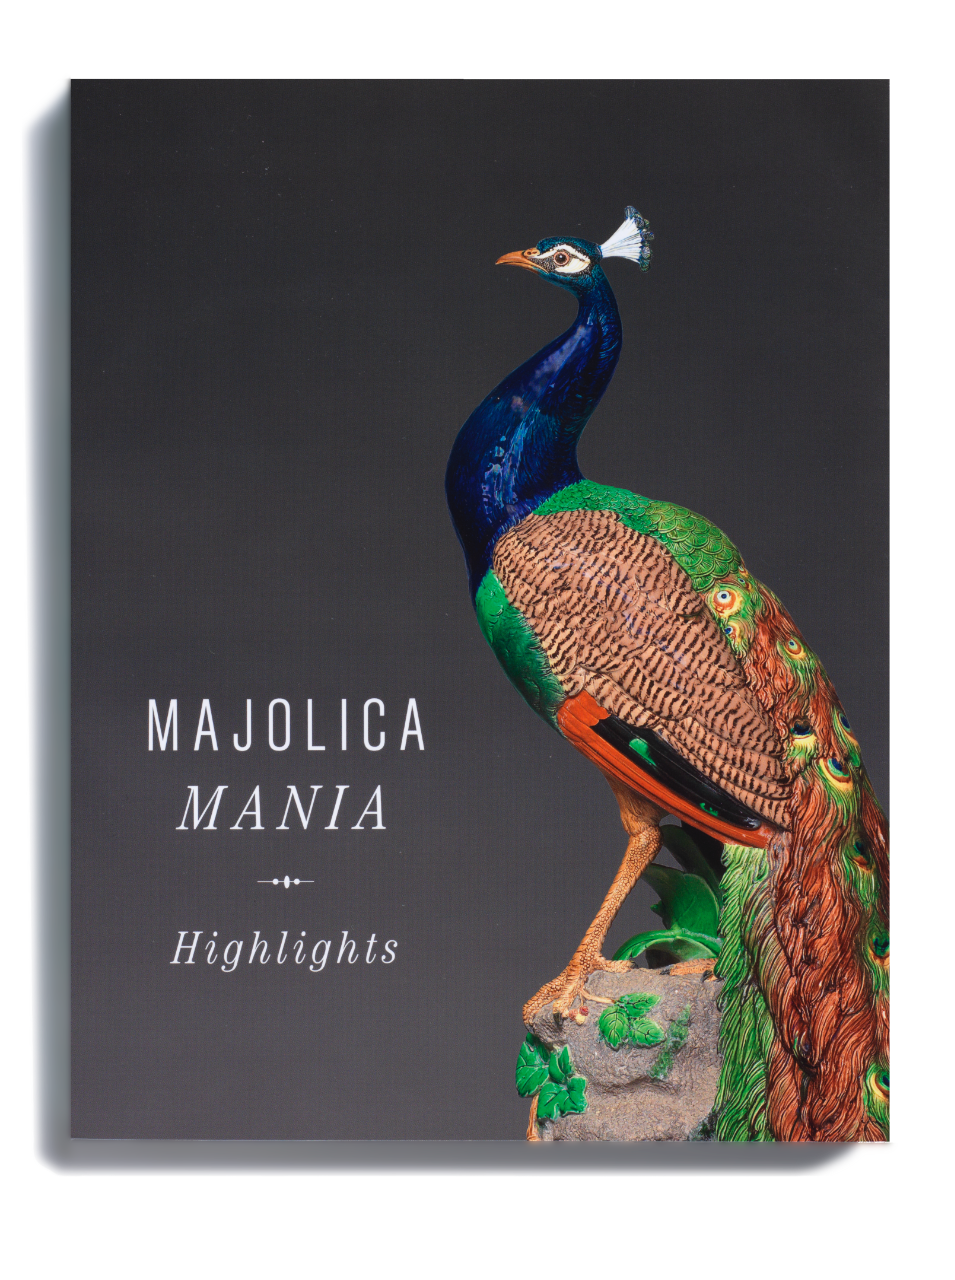 Image of the cover of the "Majolica Mania Highlights" catalogue.